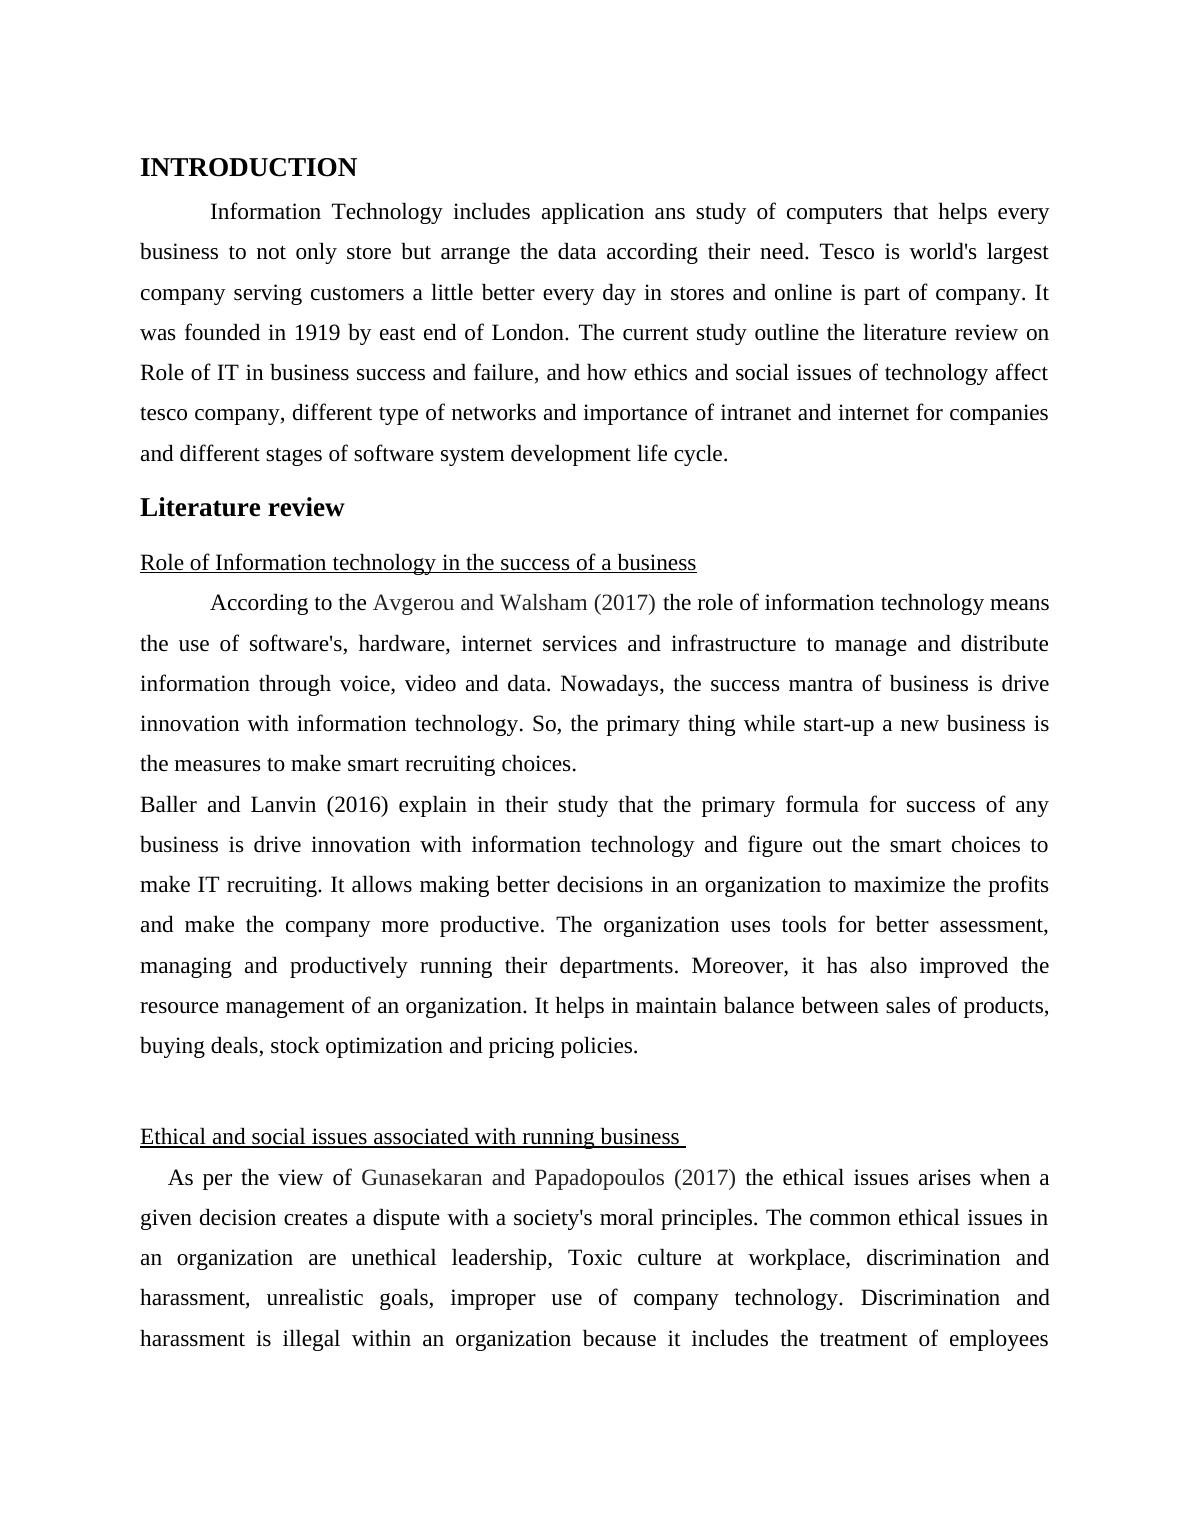 Role of Information Technology in Tesco: A Literature Review_4